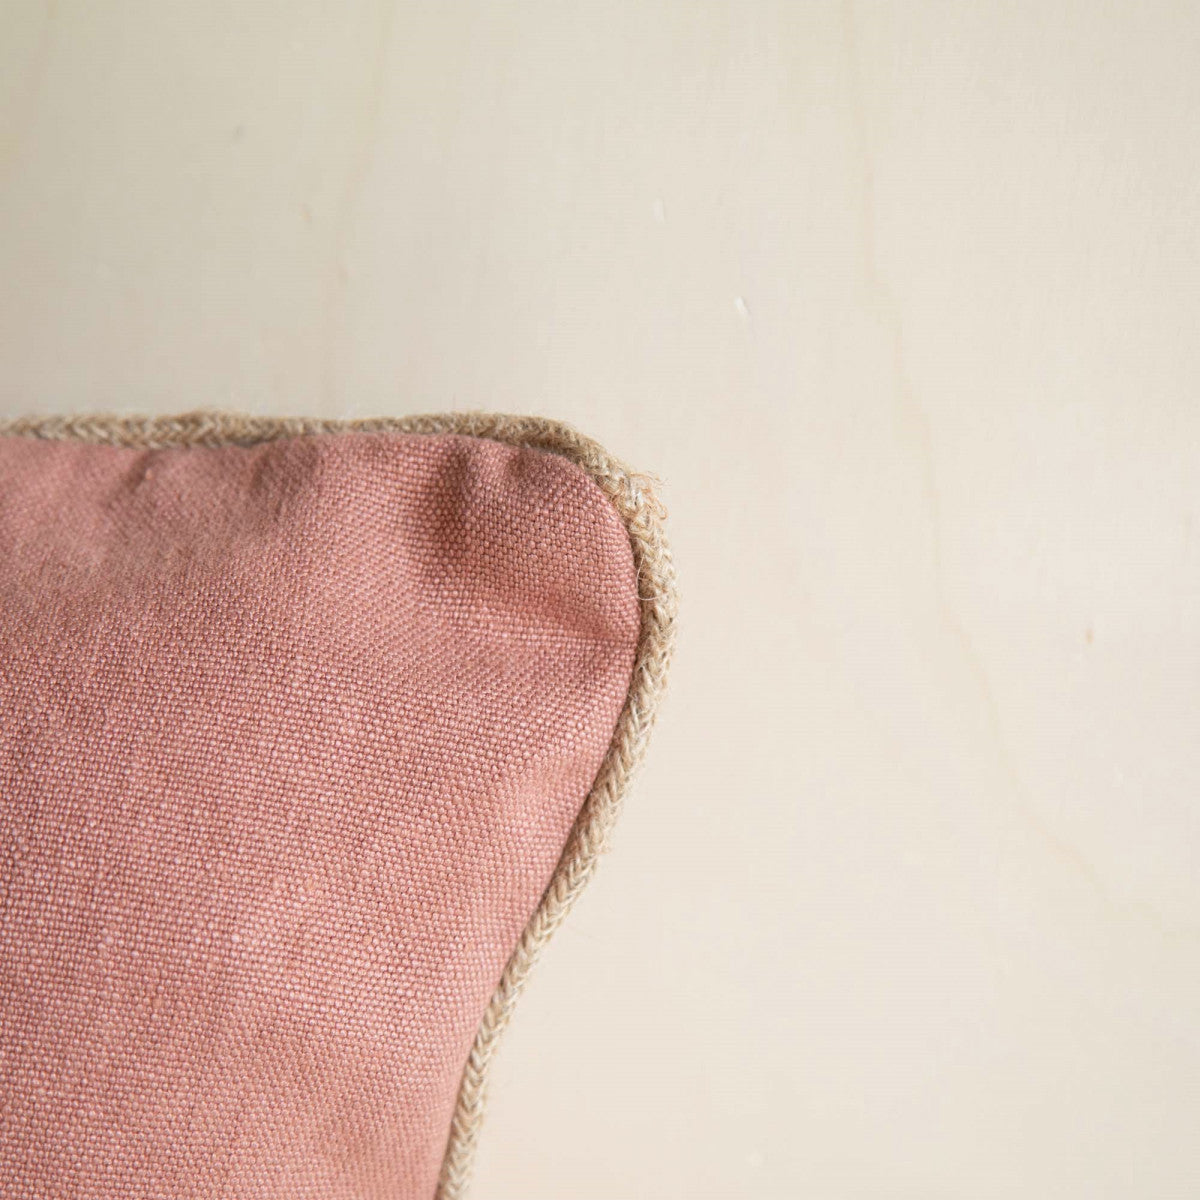 coussin rectangulaire deco rose sienne lin jute